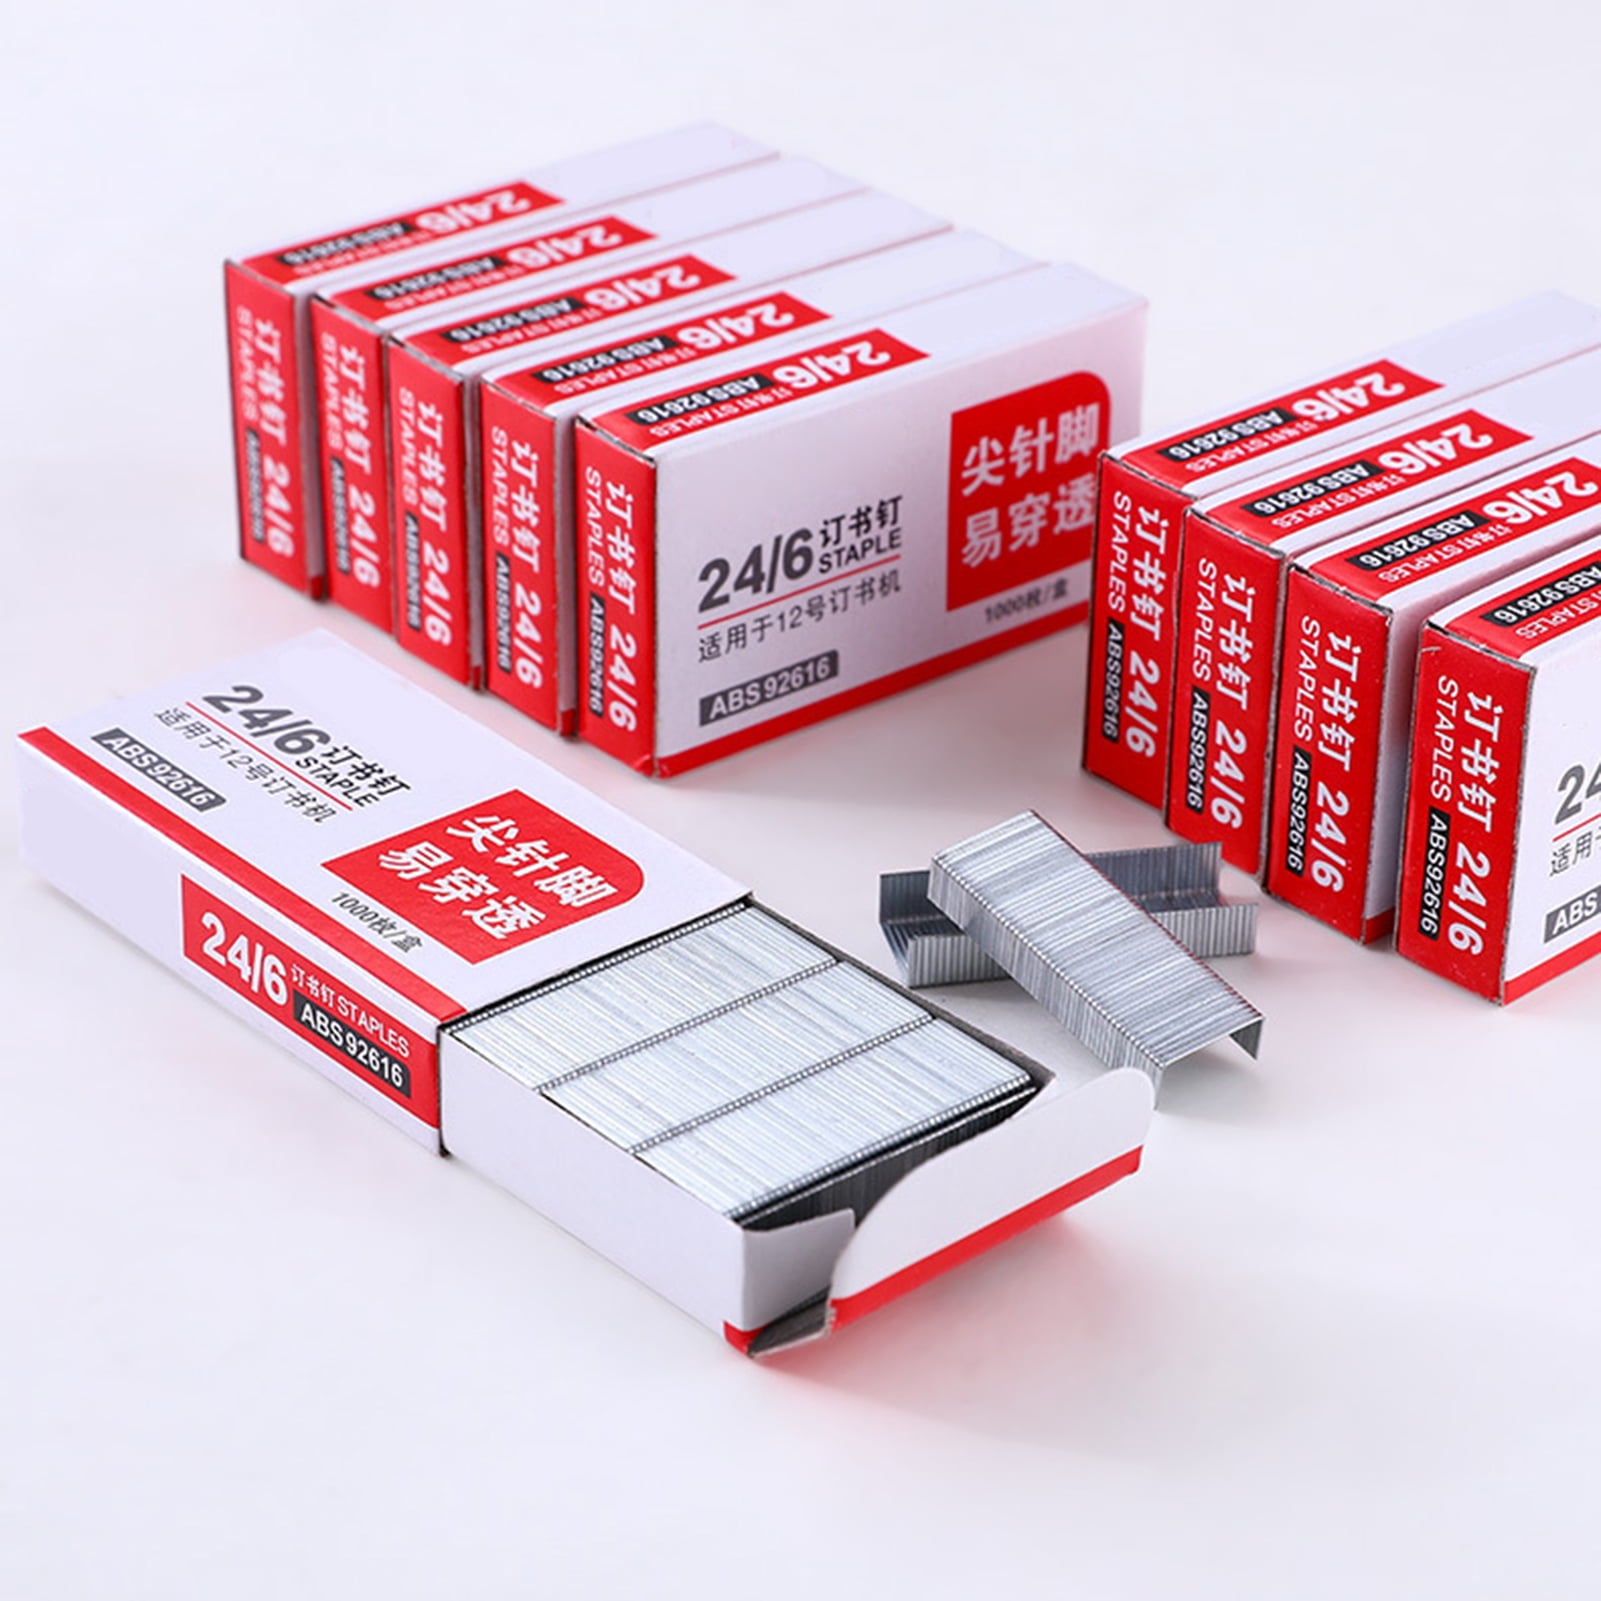 Rexel No.16 24/6 mm Standard Staples Box of 5000 Use with Desktop Staplers and Pliers For Stapling up to 20 Sheets 6010 